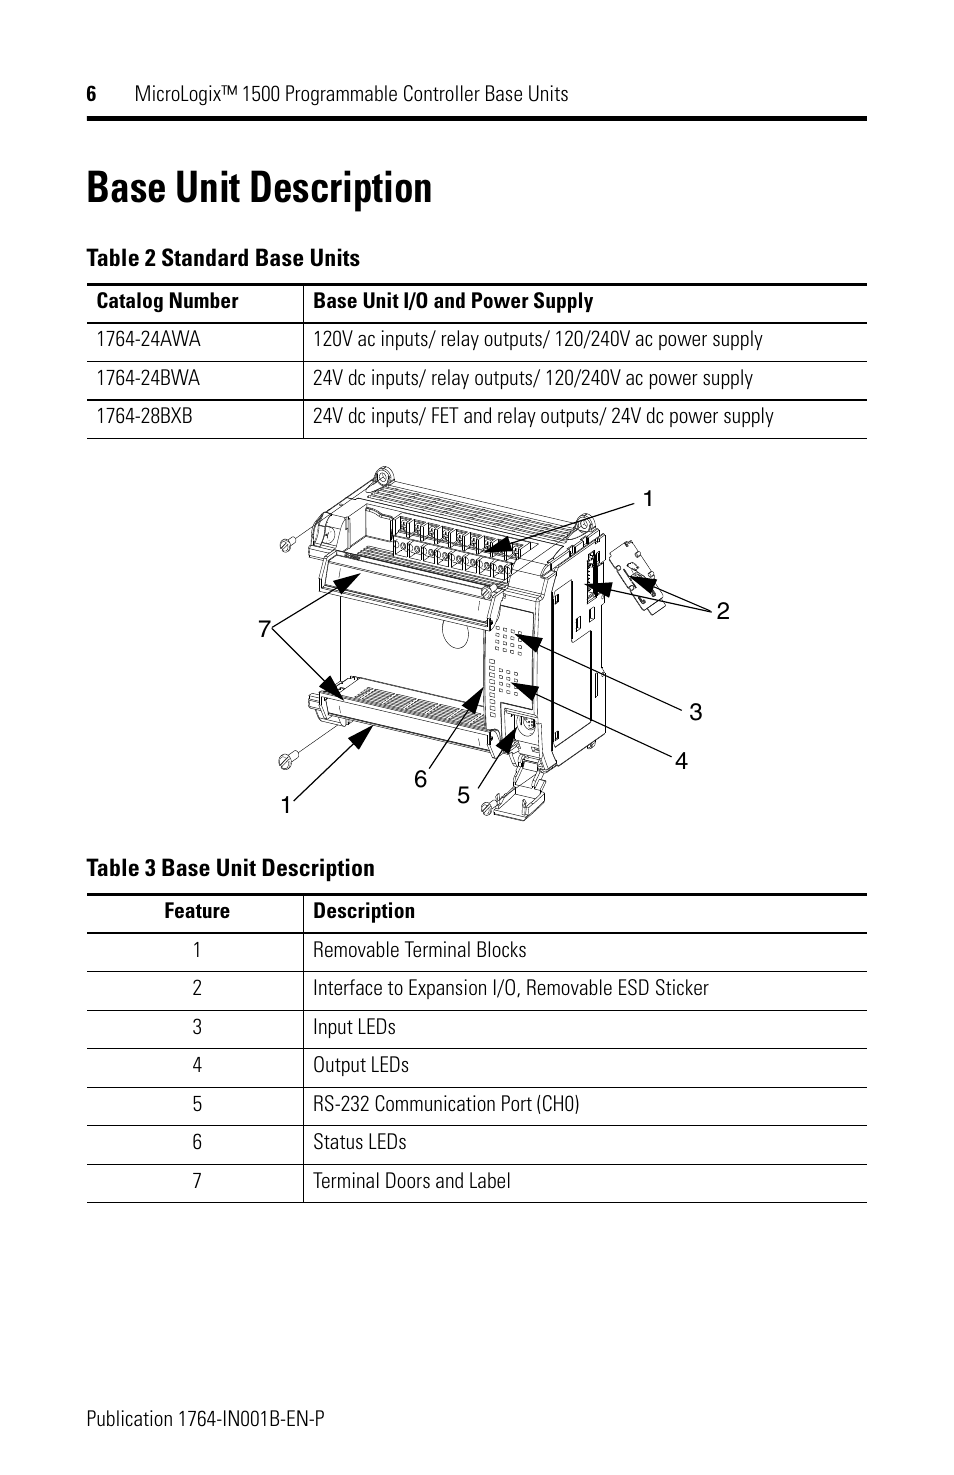 Base unit description | Rockwell Automation 1764-28BXB MicroLogix 1500 Programmable Controller Base Units User Manual | Page 6 / 27